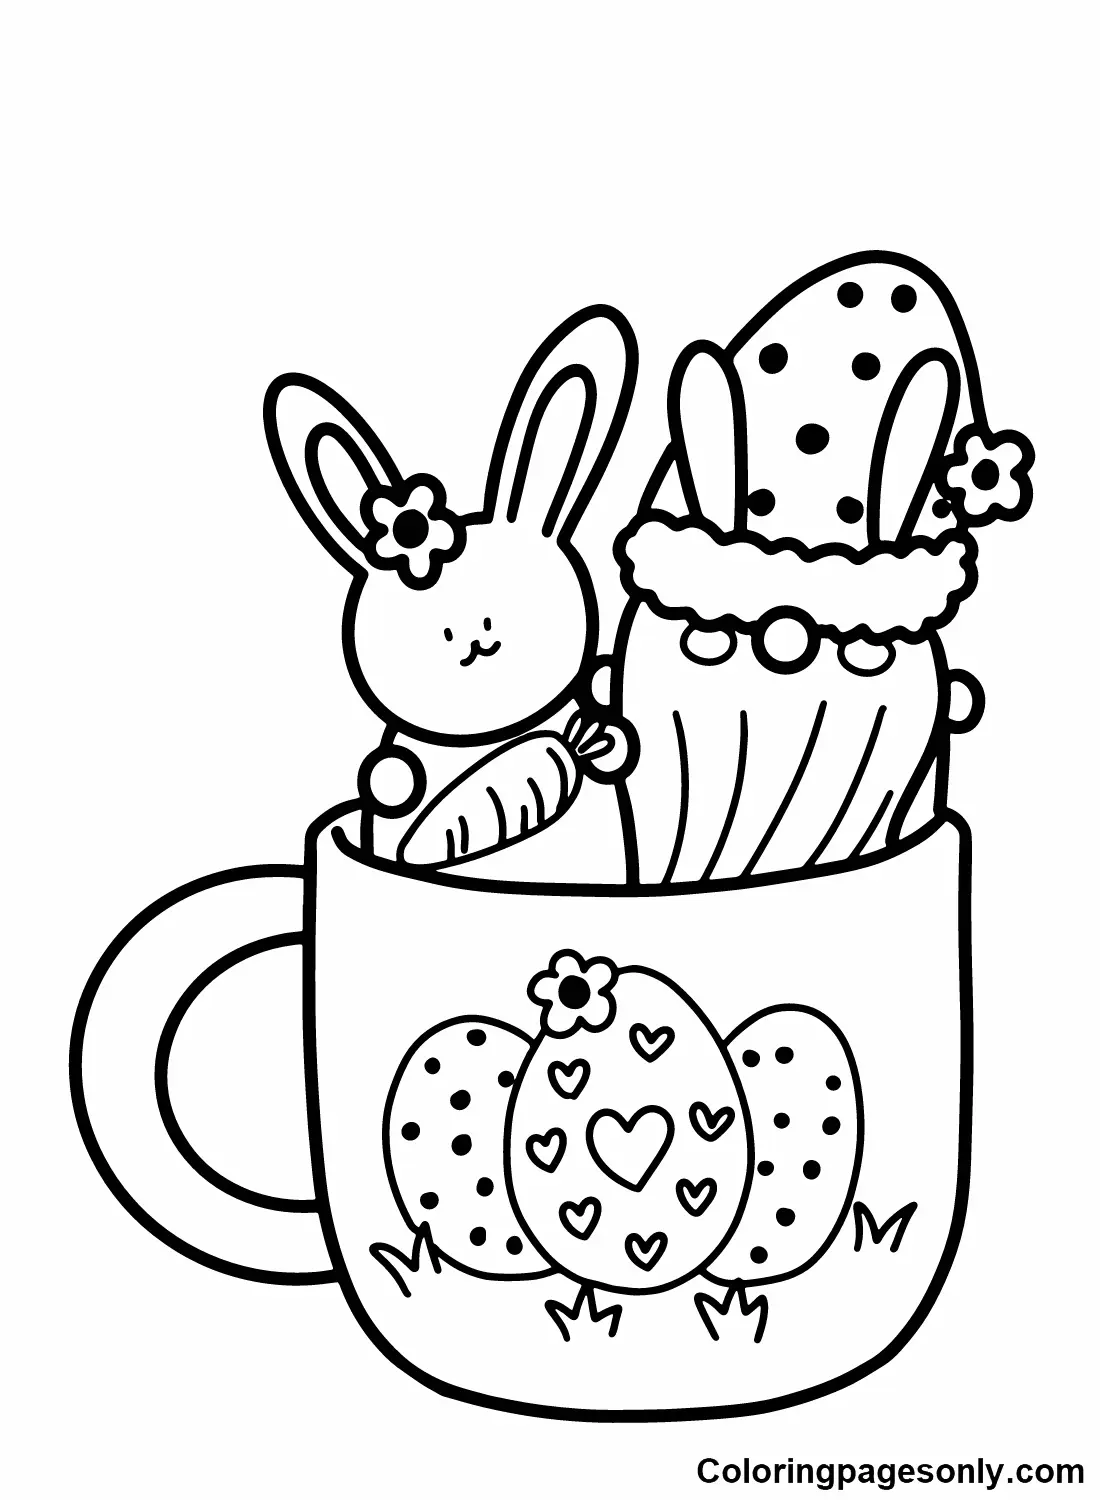 Easter Gnome Coloring Pages